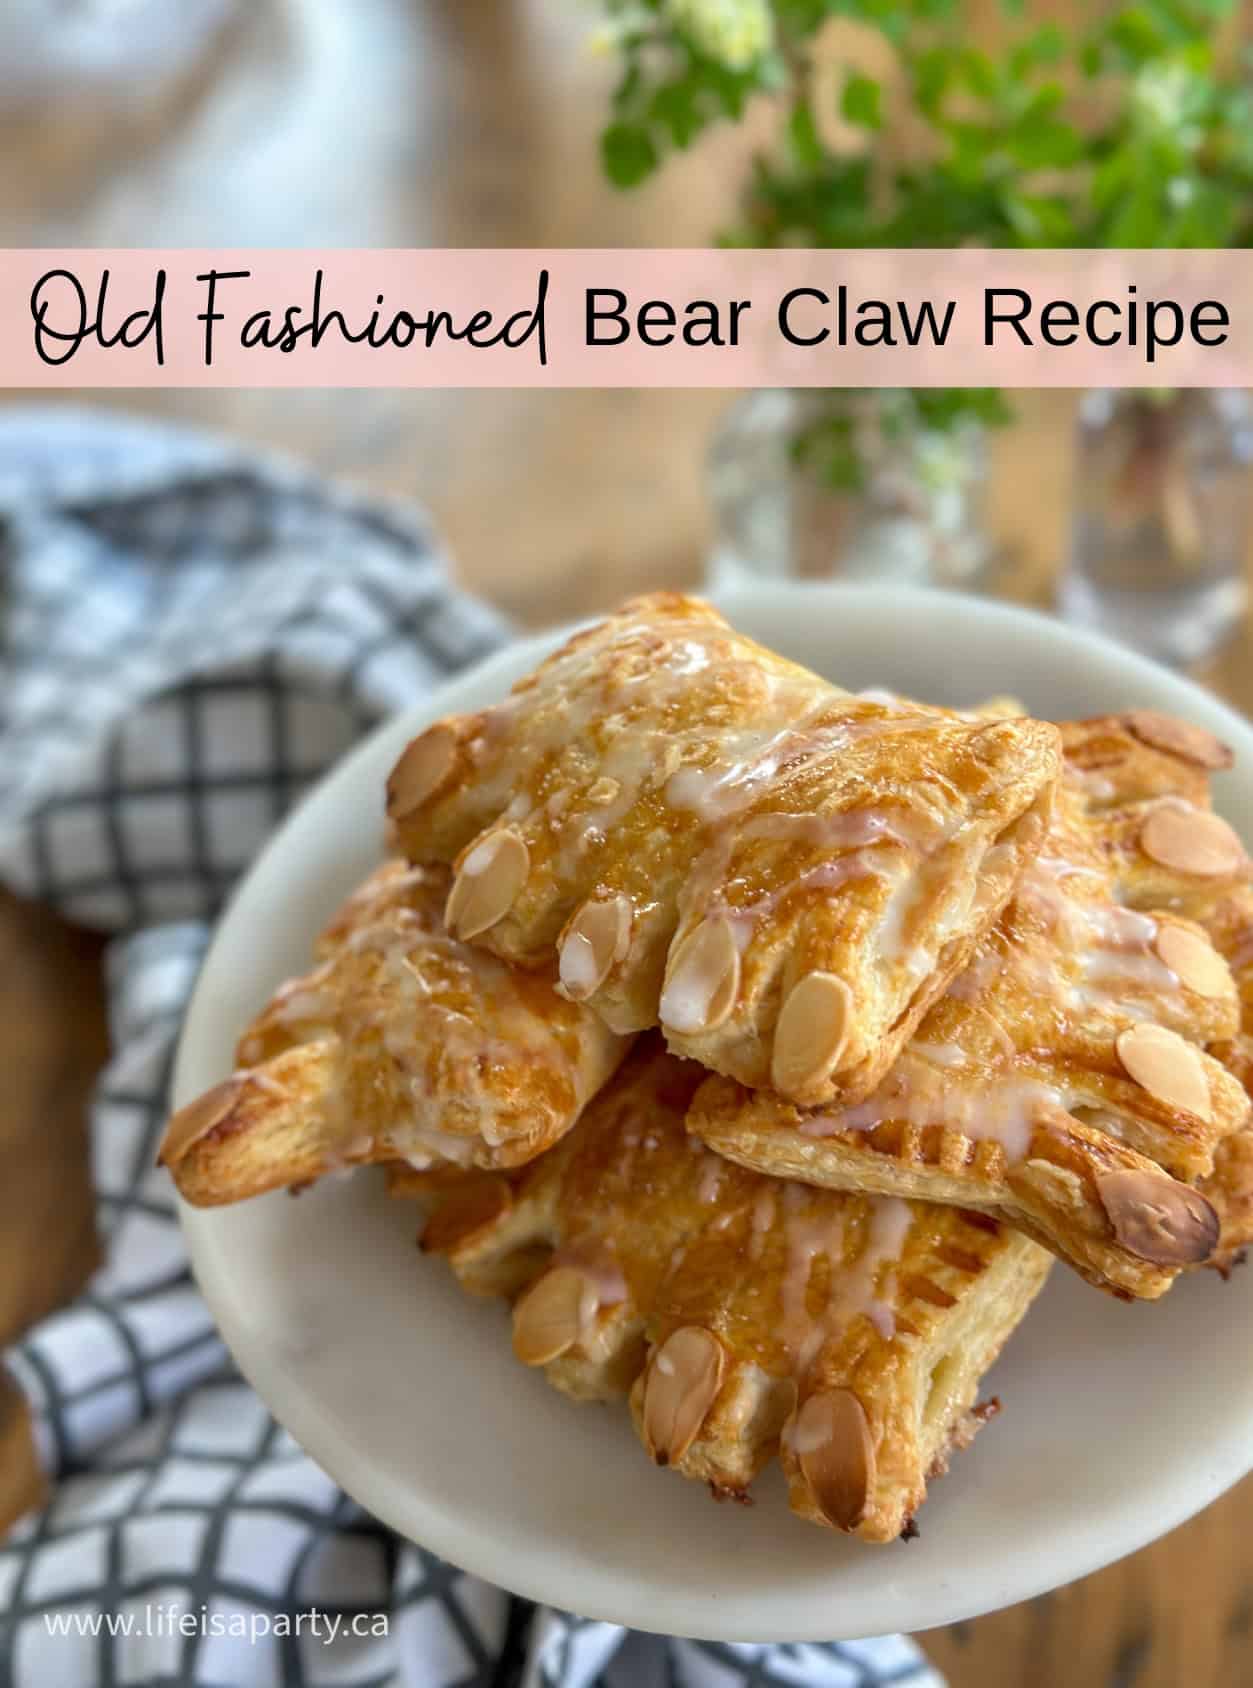 Old Fashioned Almond Bear Claw Pastries Recipe